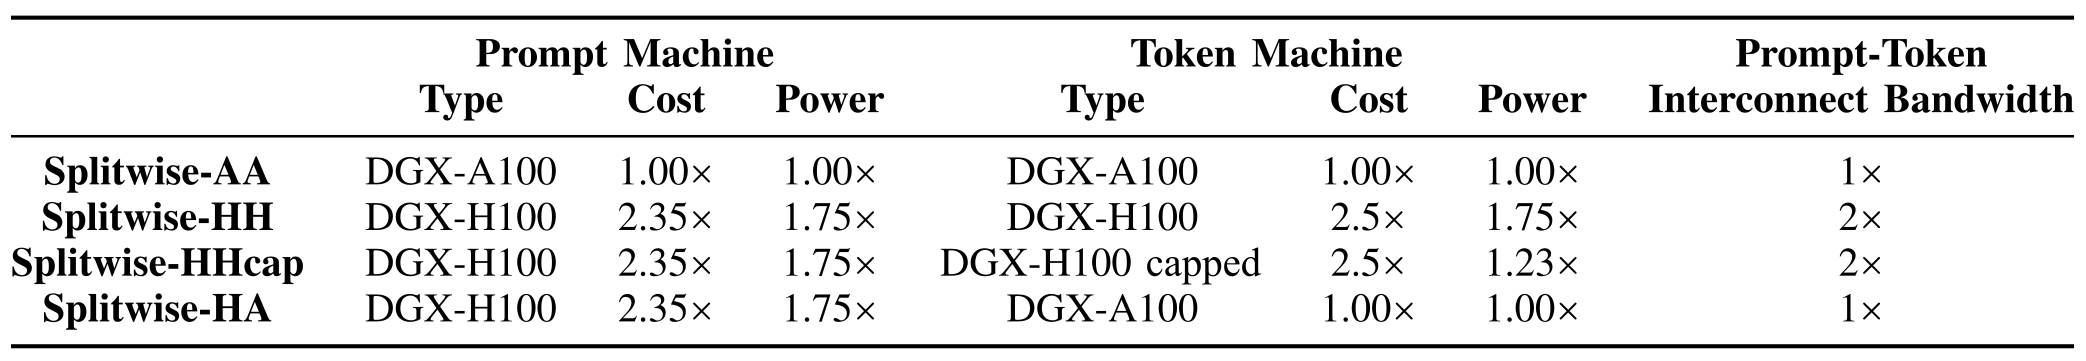 Details for the prompt and token machines we used for each cluster design, evaluated with Splitwise. All values are normalized to a baseline of DGX-A100. DGX-H100 capped is a system with all GPUs power-capped to half the maximum power. 